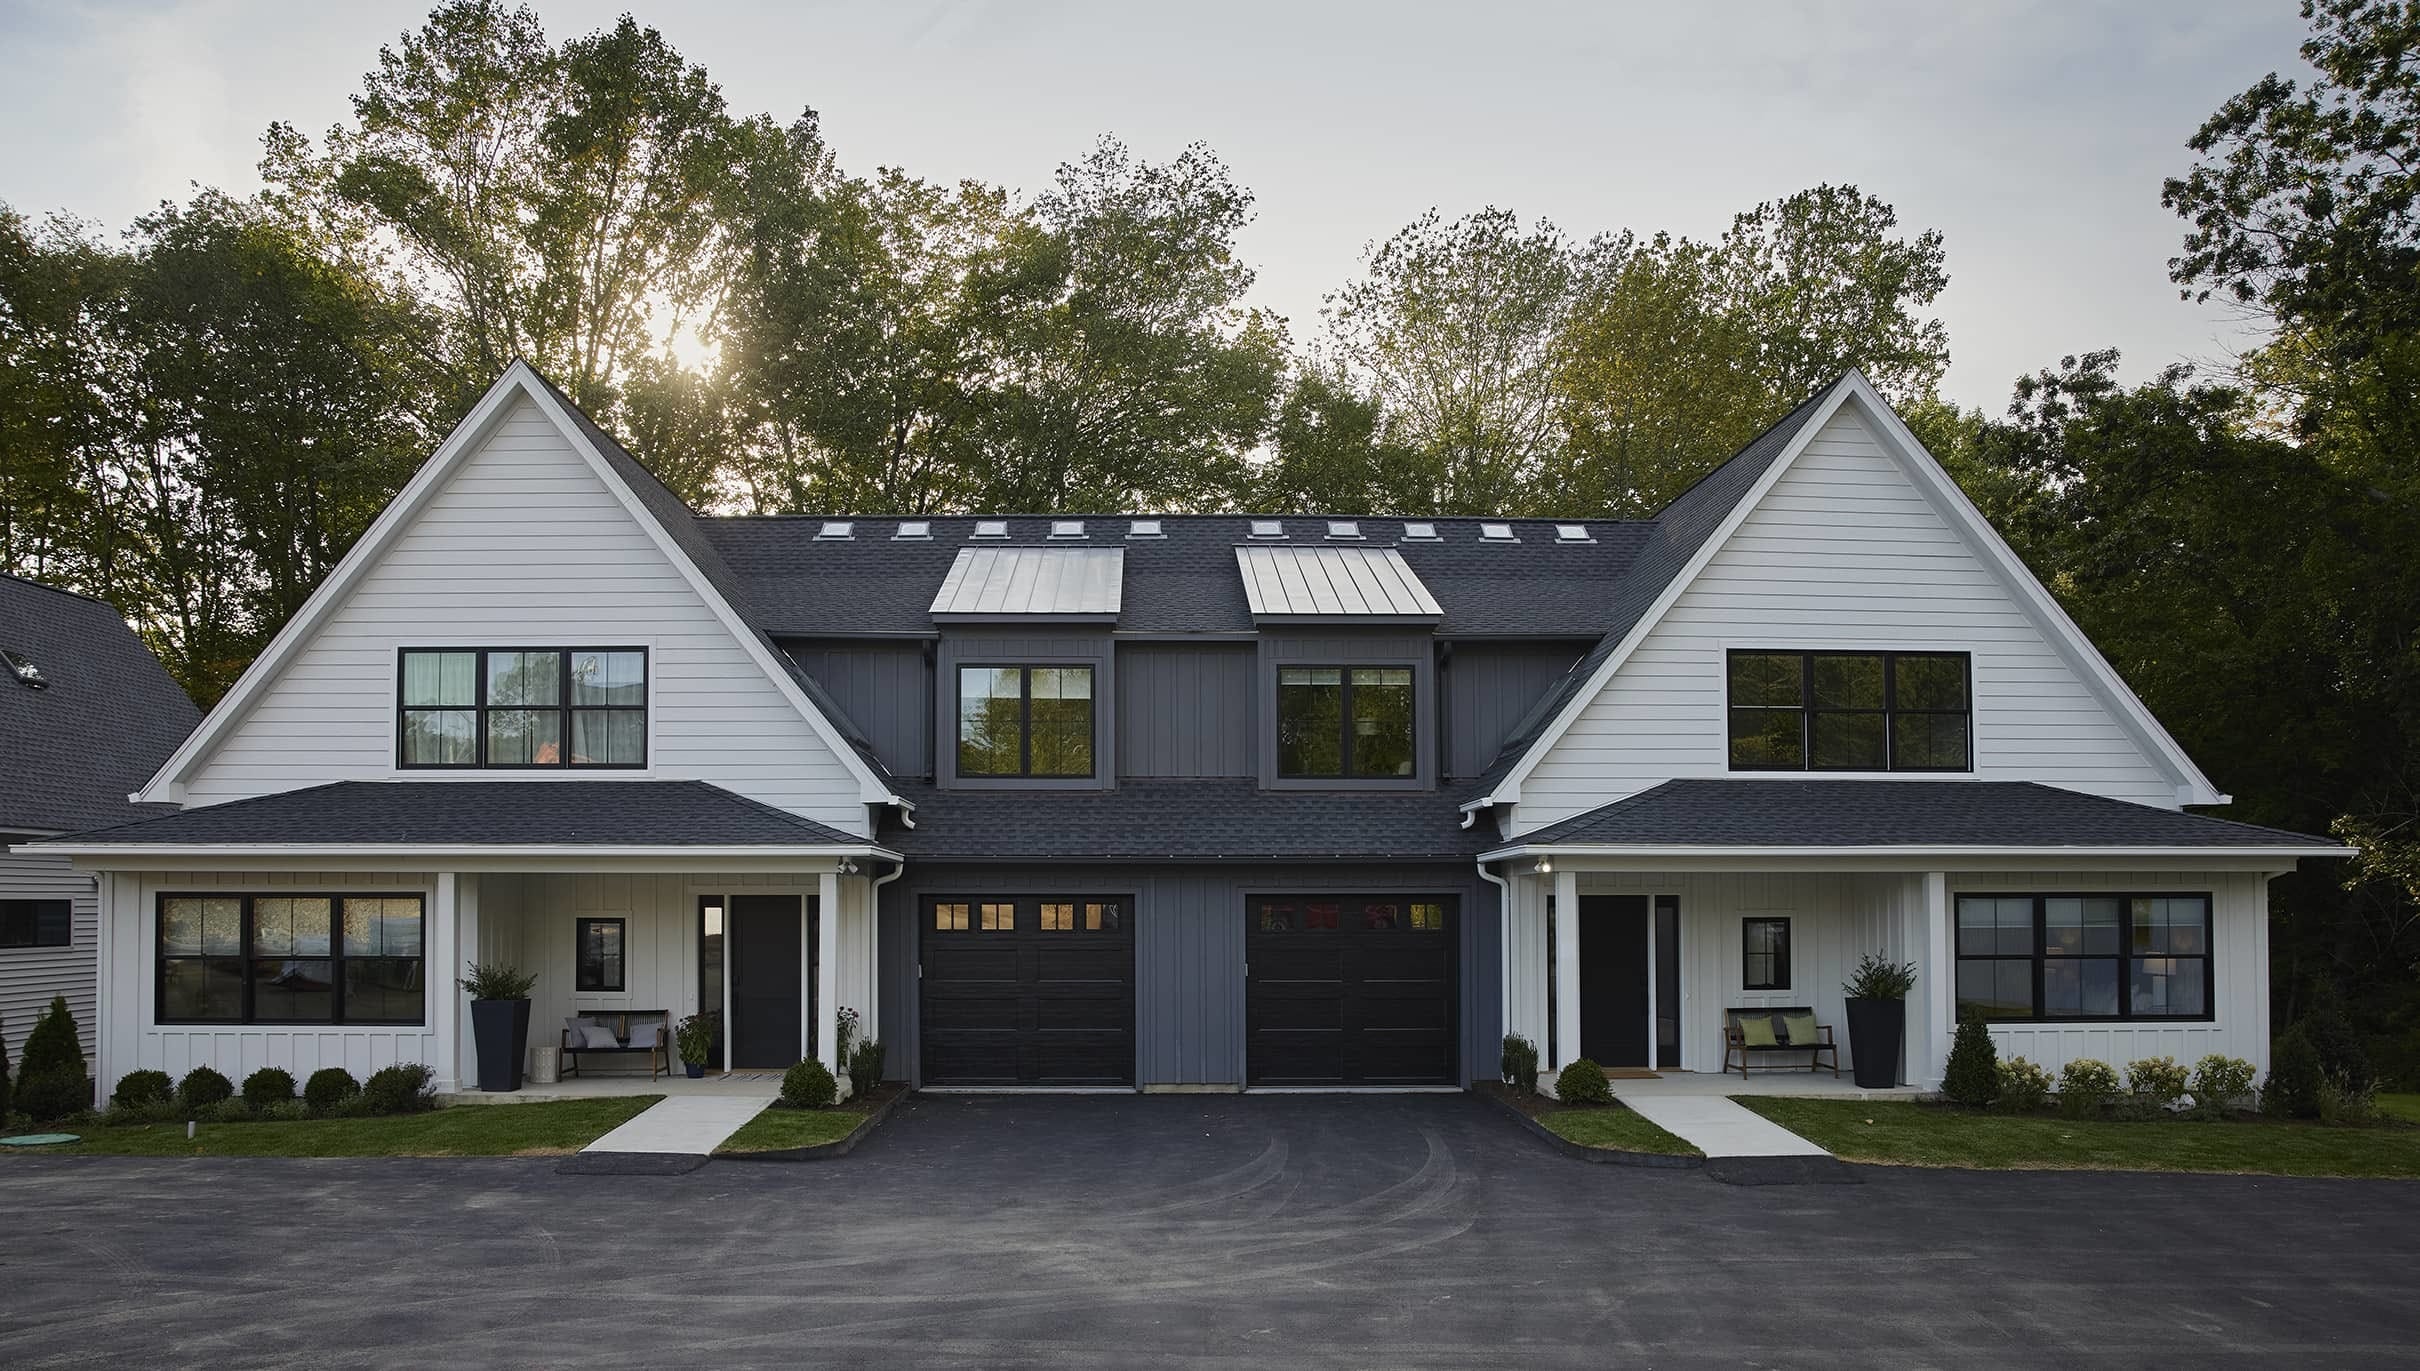 Duplex home with white siding, black trim trees in the background and setting sun